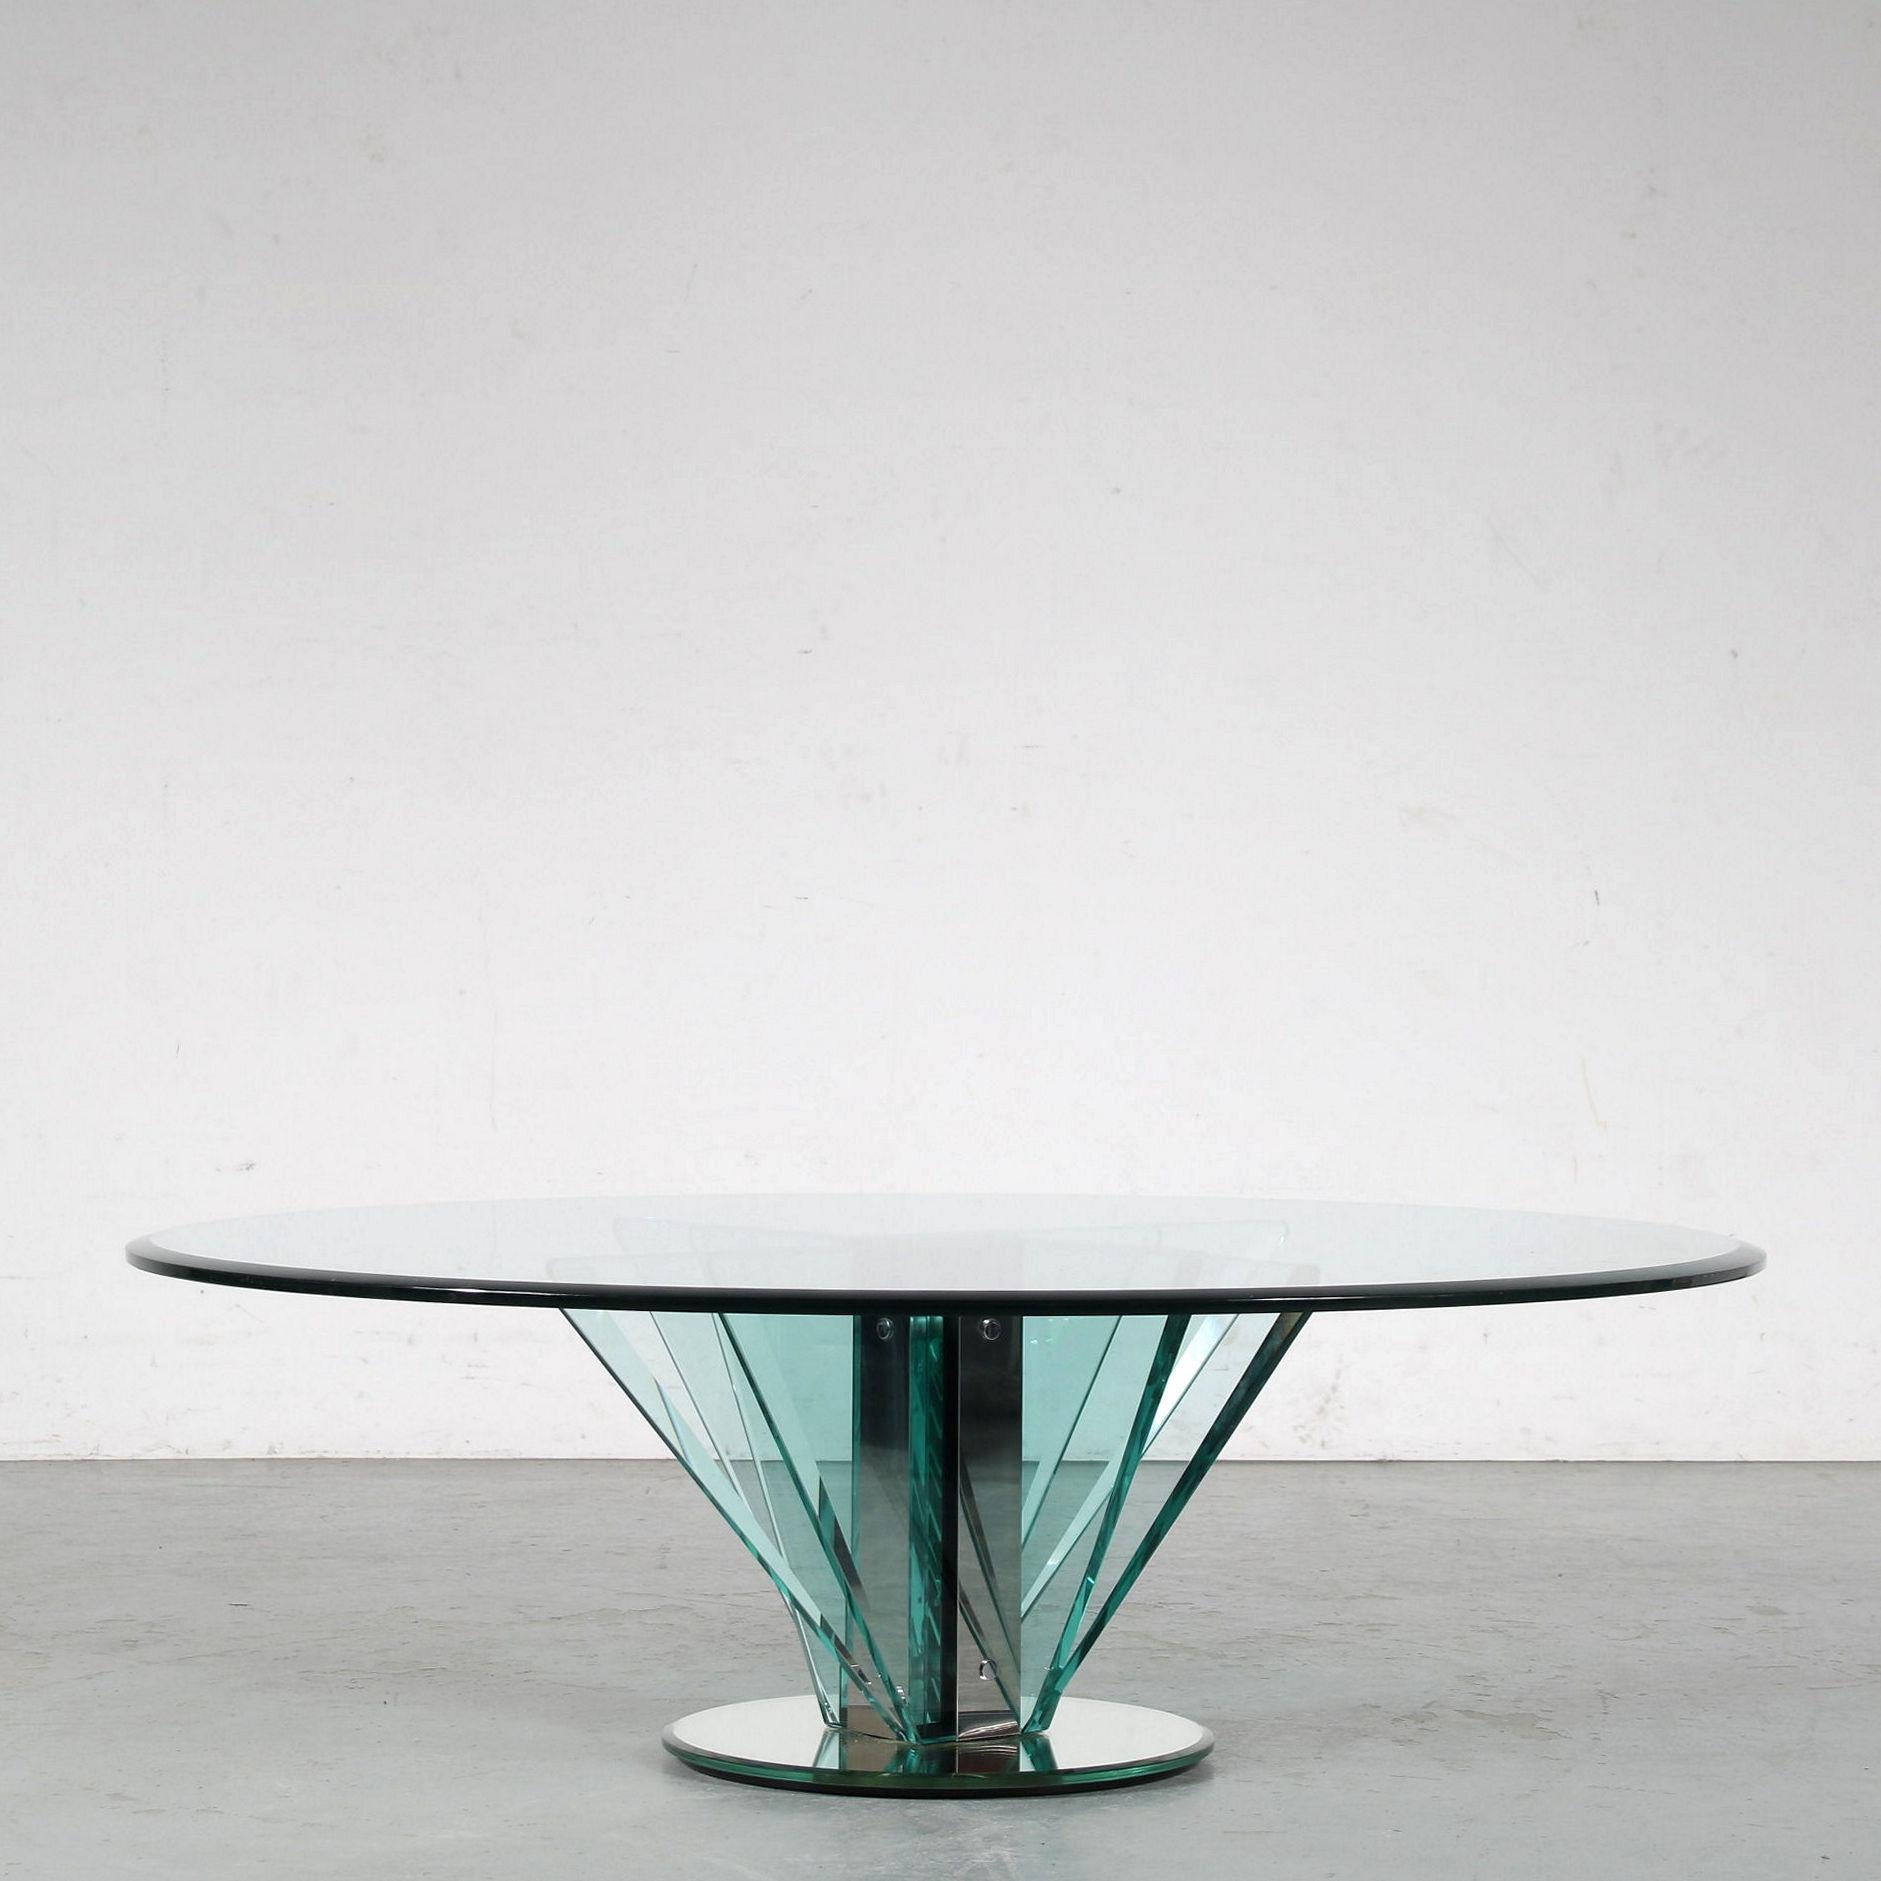 An outstanding coffee table attributed to Pietro Chiesa for Fontana Arte, manufactured in Italy around 1970.

This amazing piece is made of high quality clear Nile glass, giving it an impressive style and unique appearance. The several rectangle /